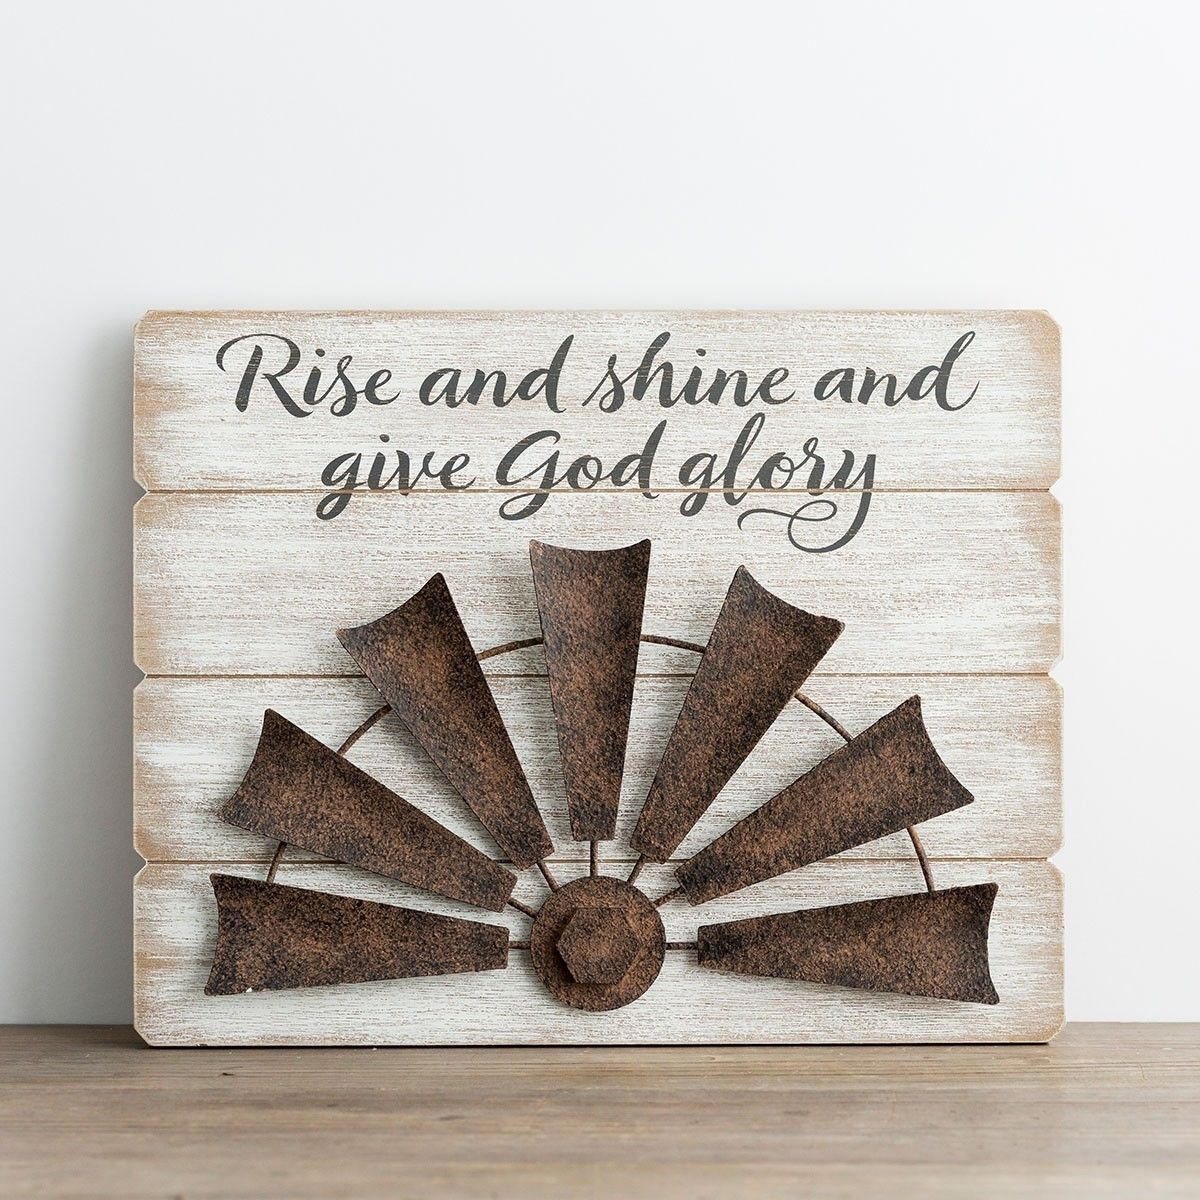 Give God Glory Wood & Metal Wall Art | Dayspring With Regard To Wood And Metal Wall Art (View 20 of 20)